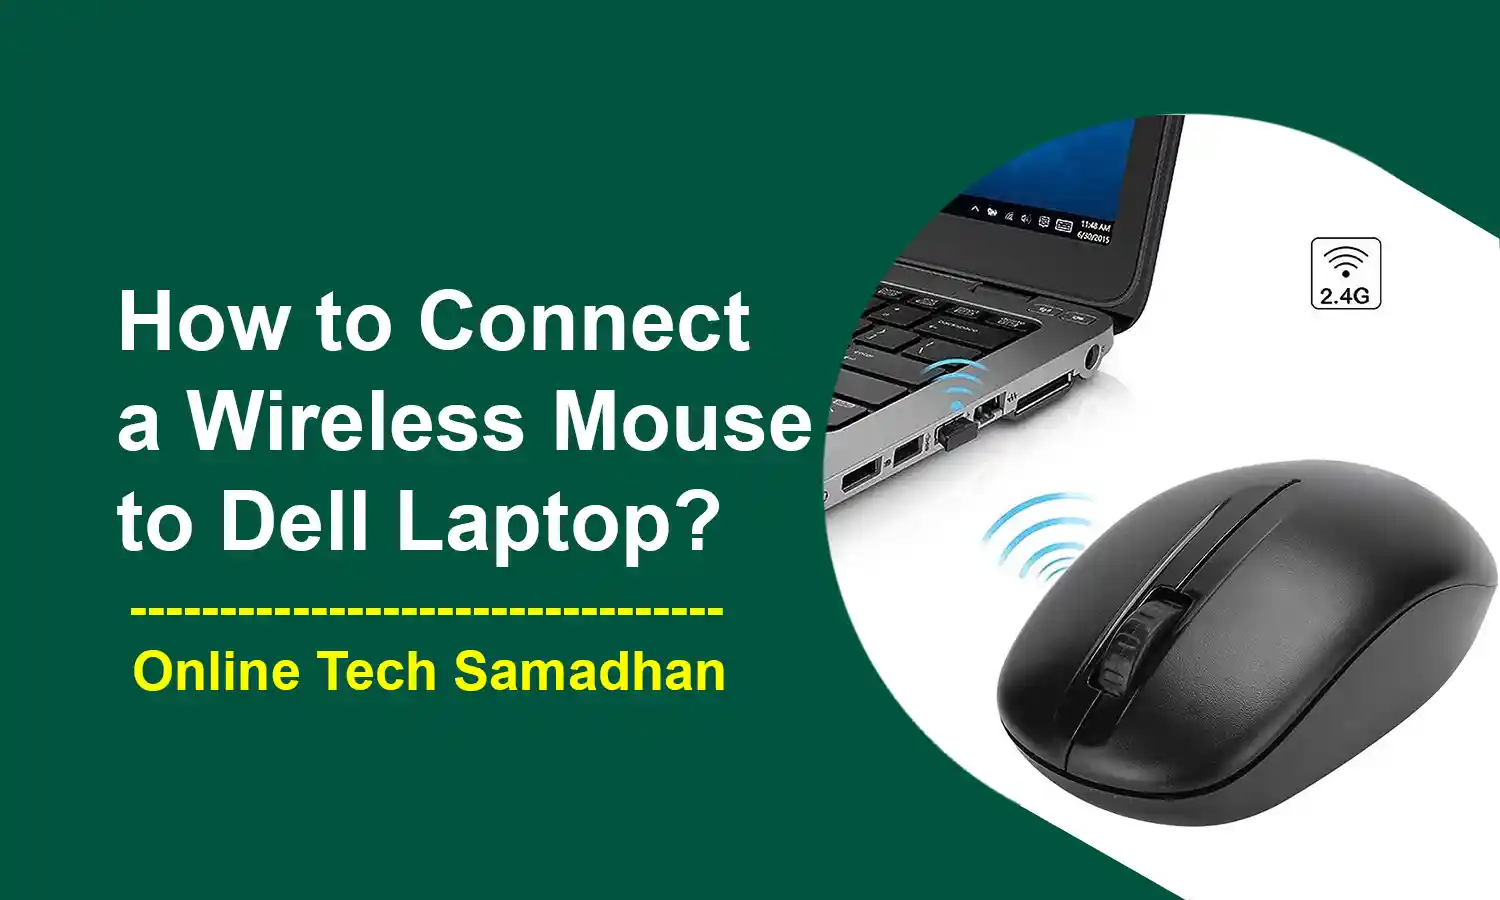 How to Connect a Wireless Mouse to Dell Laptop